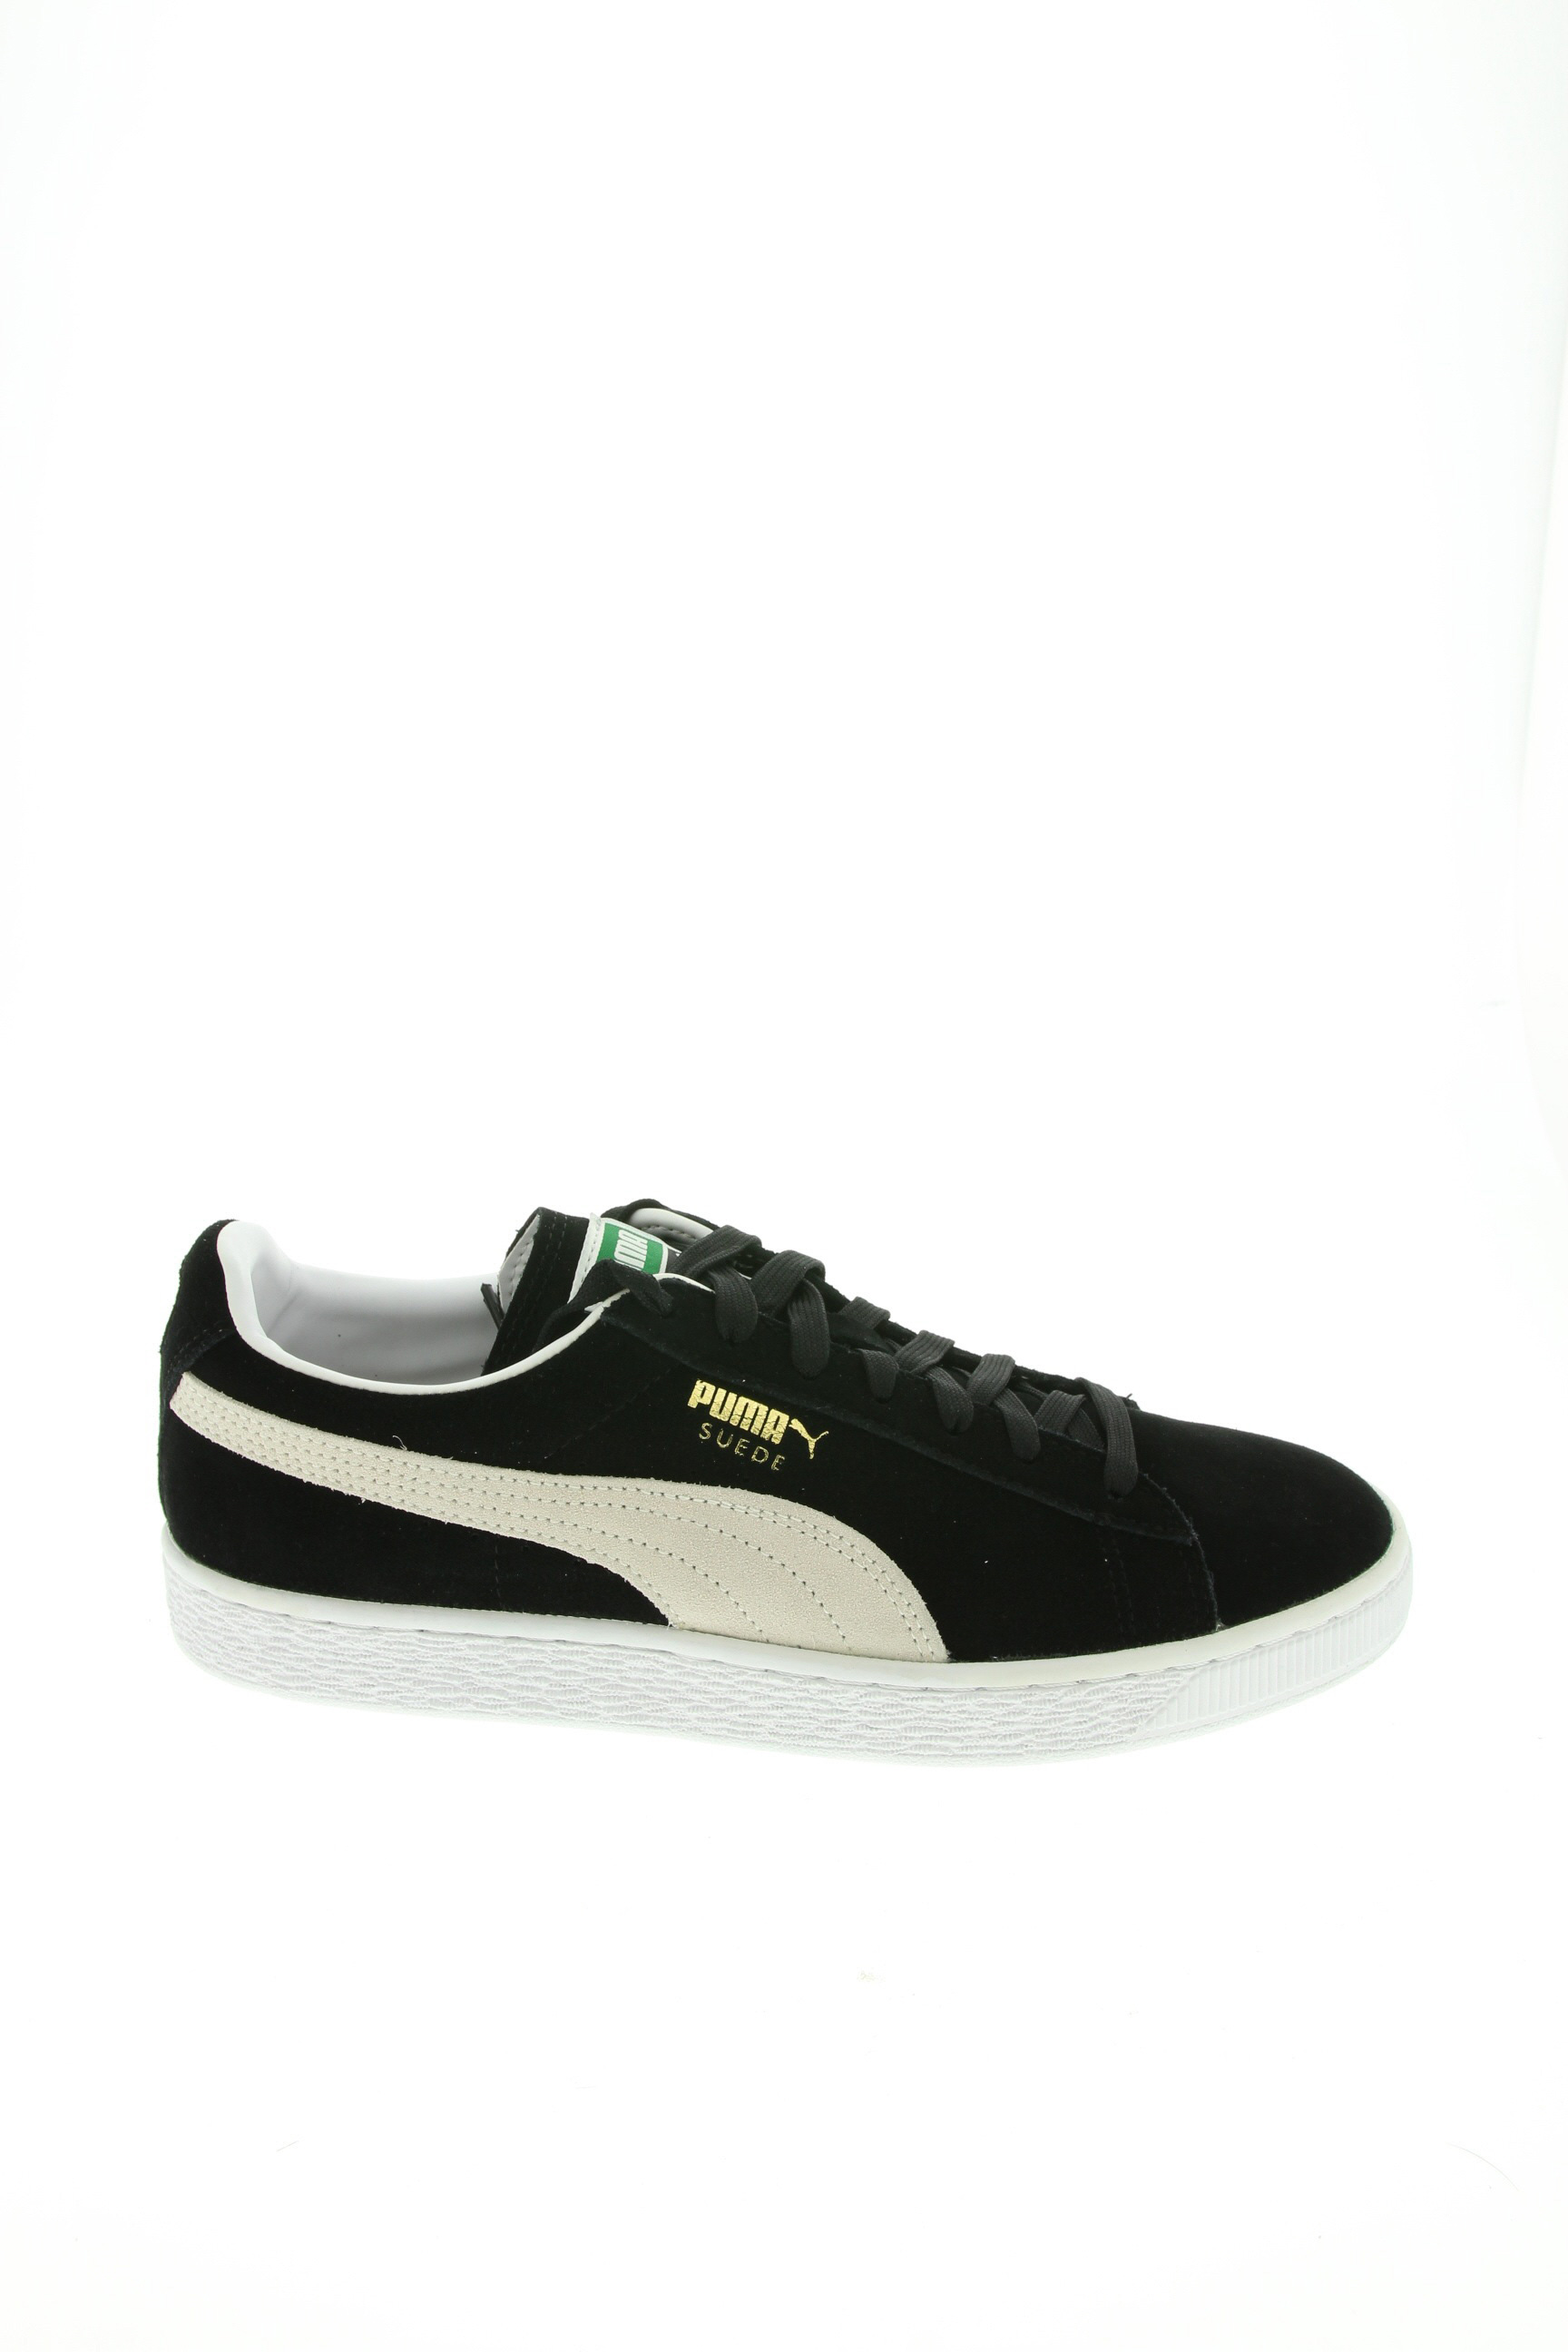 puma homme taille 43